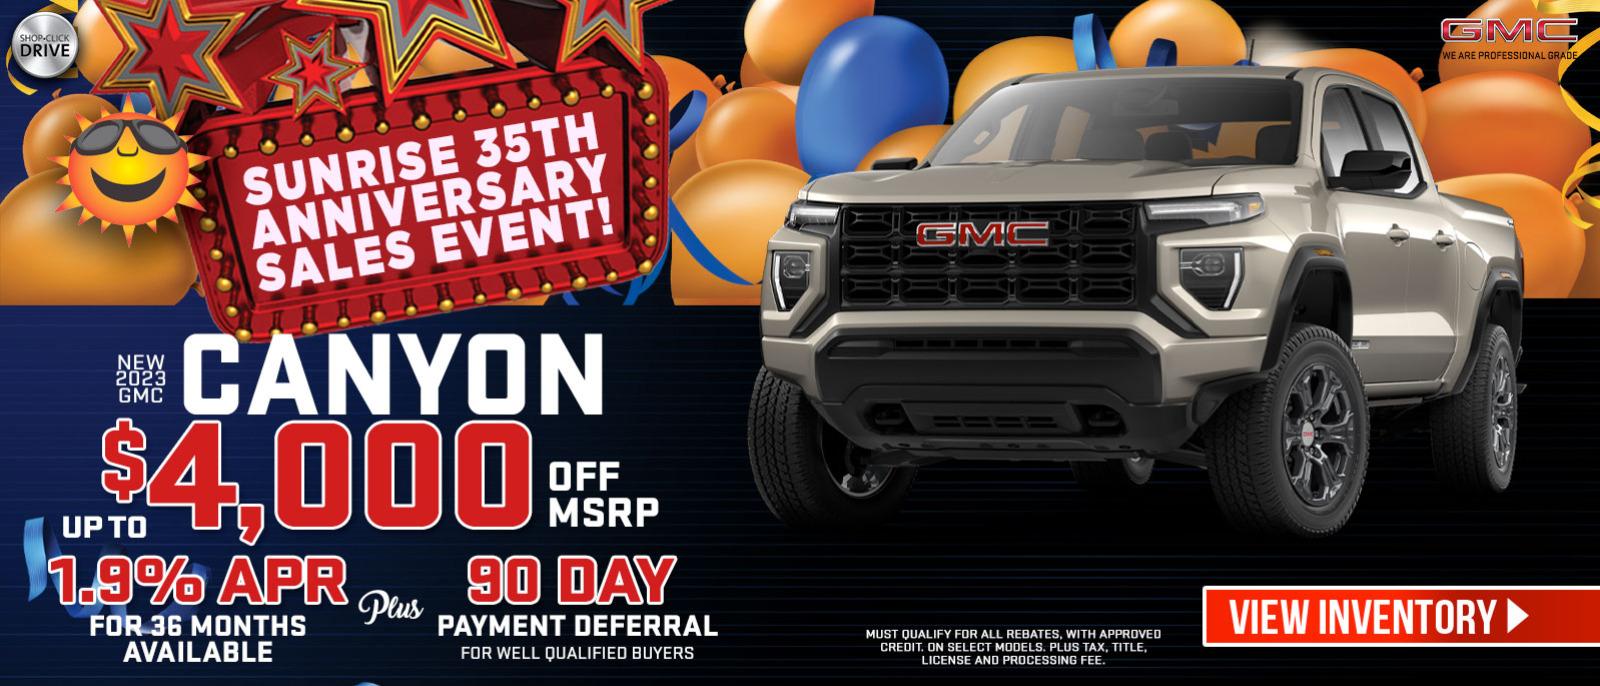 New 2023 GMC Canyon - Up to 3000 Off MSRP